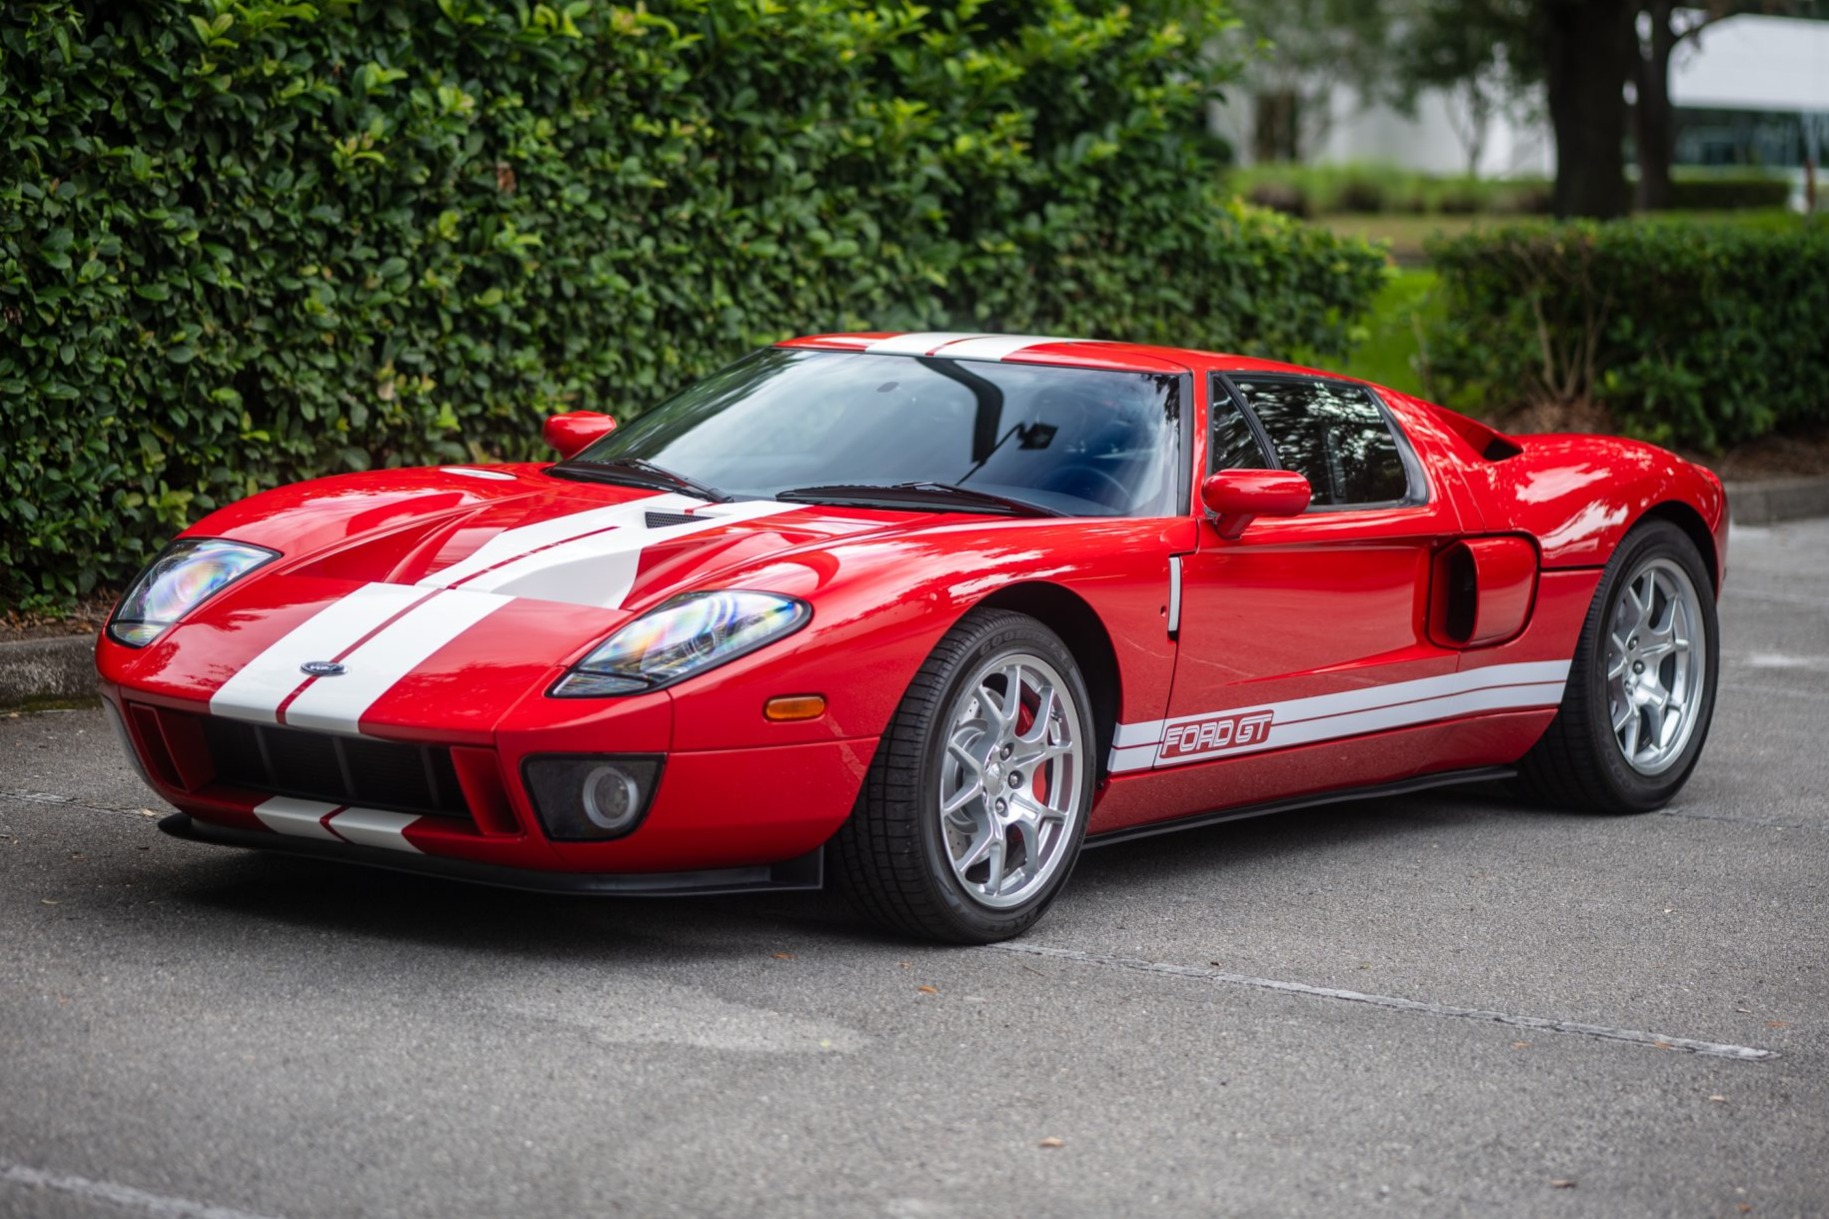 Used 6k-Mile 2006 Ford GT Review